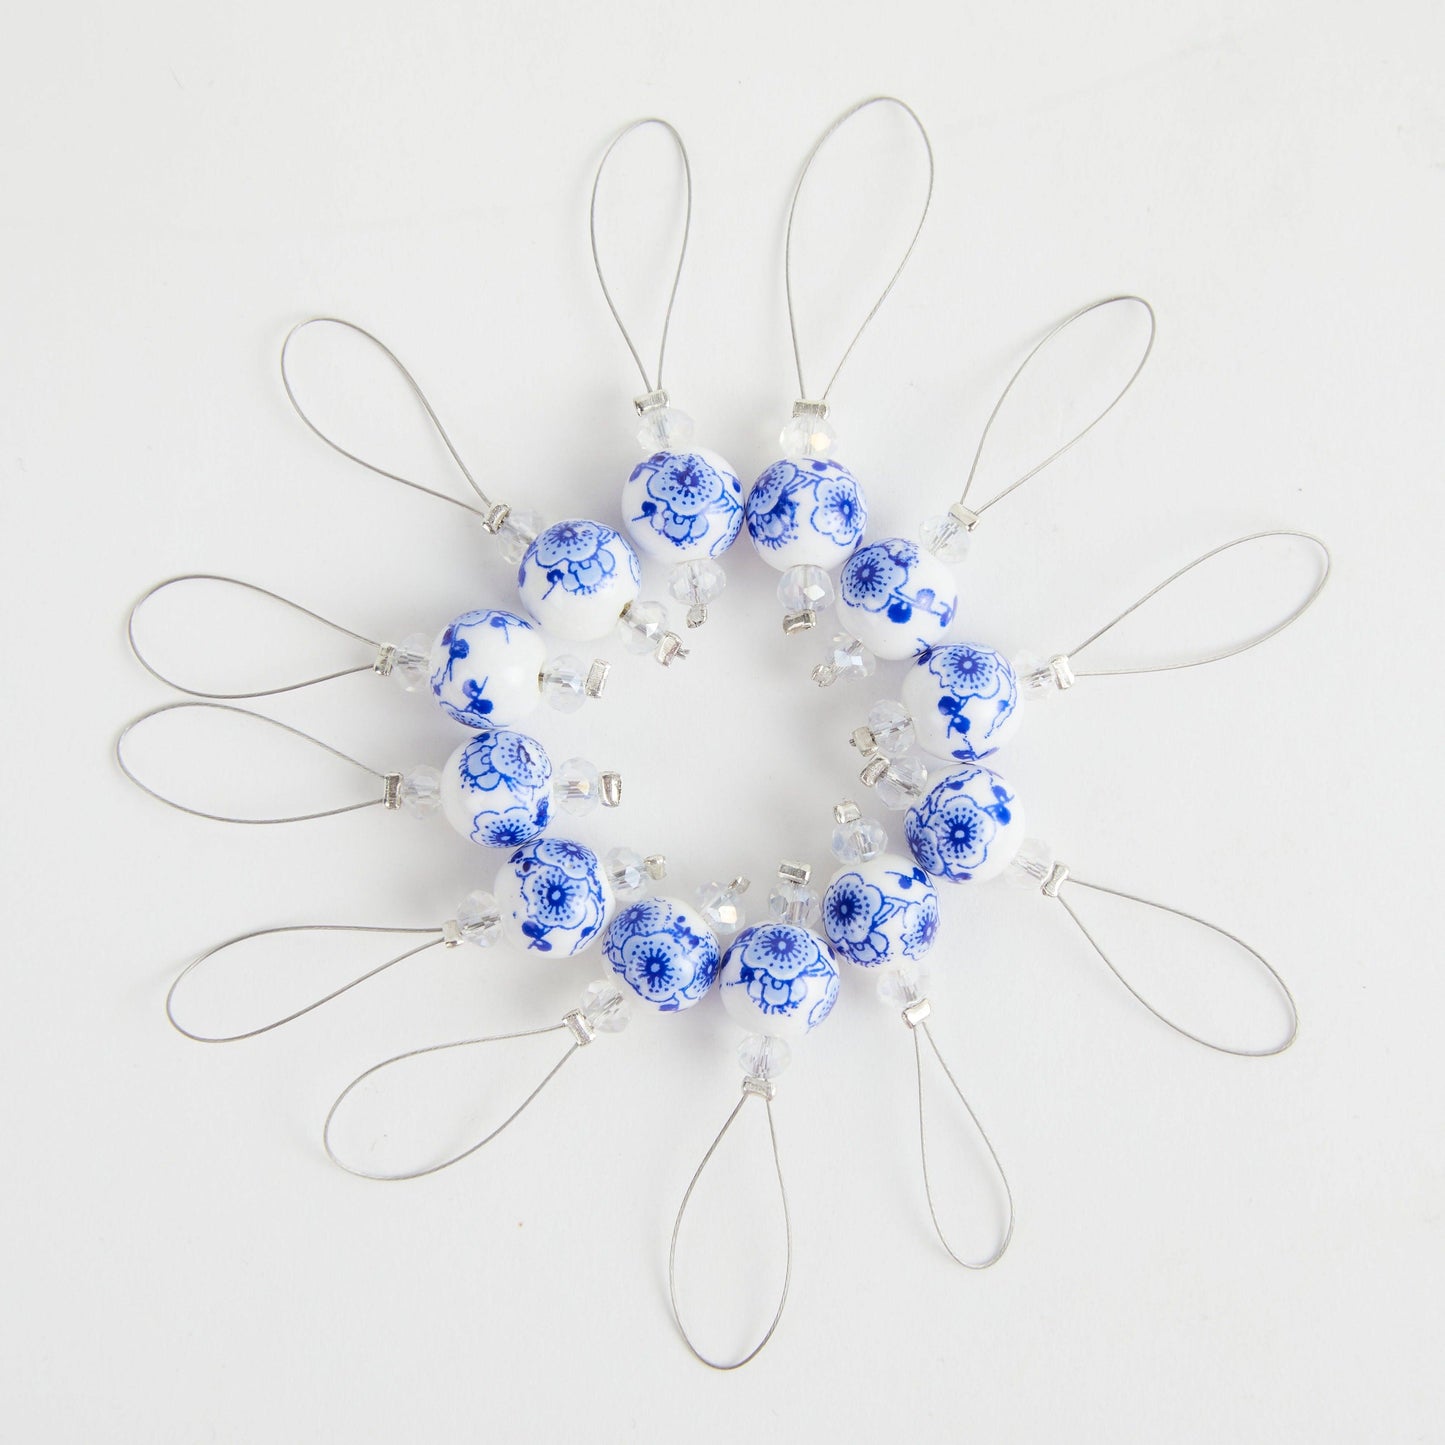 KnitPro NEW ZOONI Stitch Markers in Playful Beads "Blooming Blue" (11256) - Leo Hobby